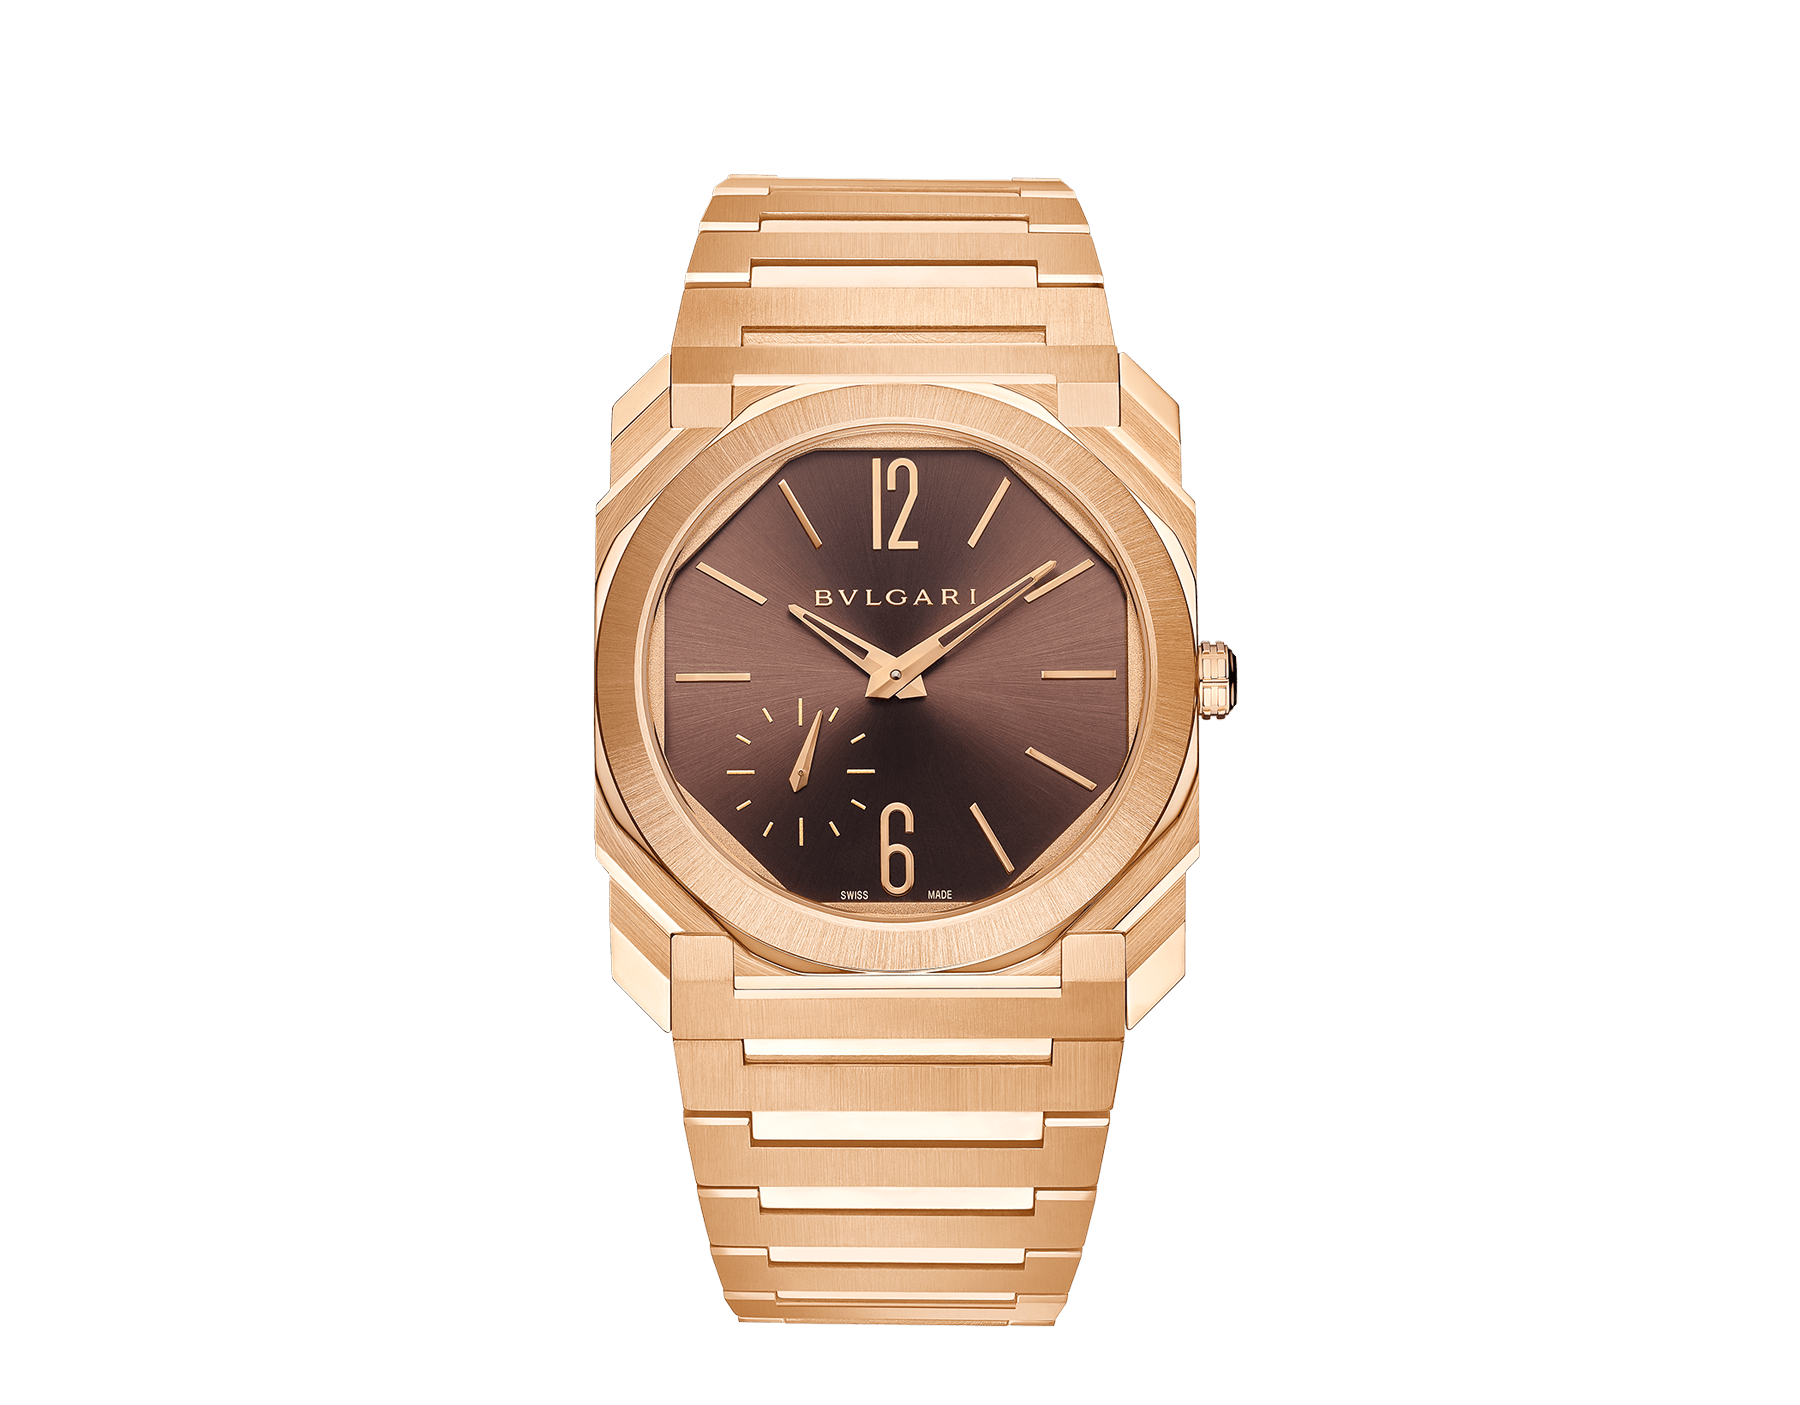 Octo Finissimo Automatic watch with mechanical manufacture ultra-thin movement (2.23 mm thick), automatic winding, satin-polished 18 kt rose gold case and bracelet and brown lacquered dial with sunray finish. Water-resistant up to 100 metres 103637 image 1